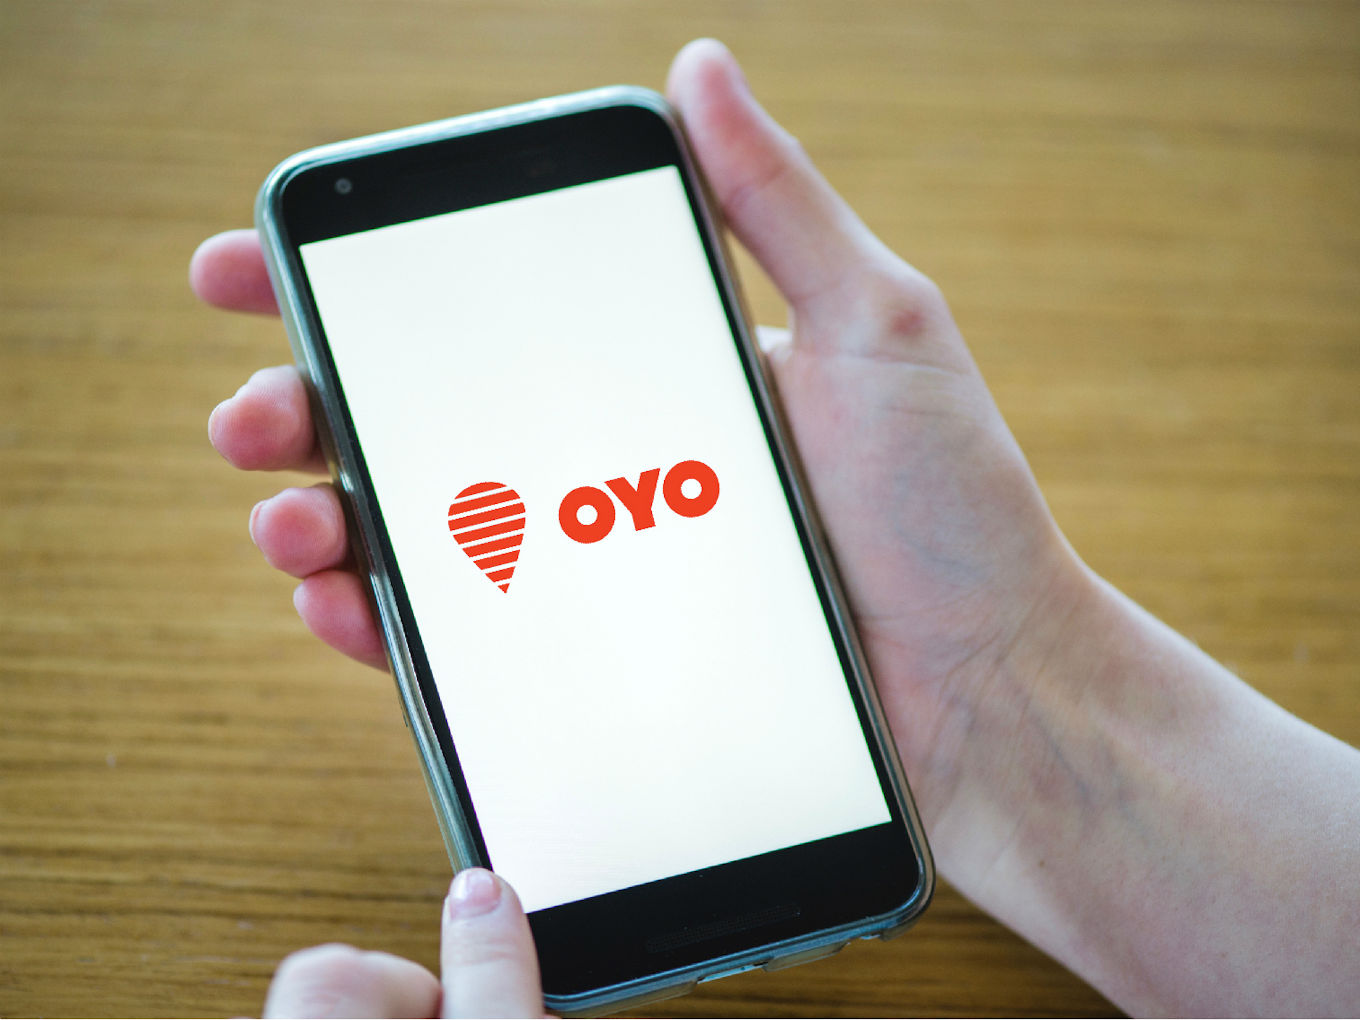 Will Oyo Bubble Burst In 2020 As “Toxic” Culture Comes To Light?